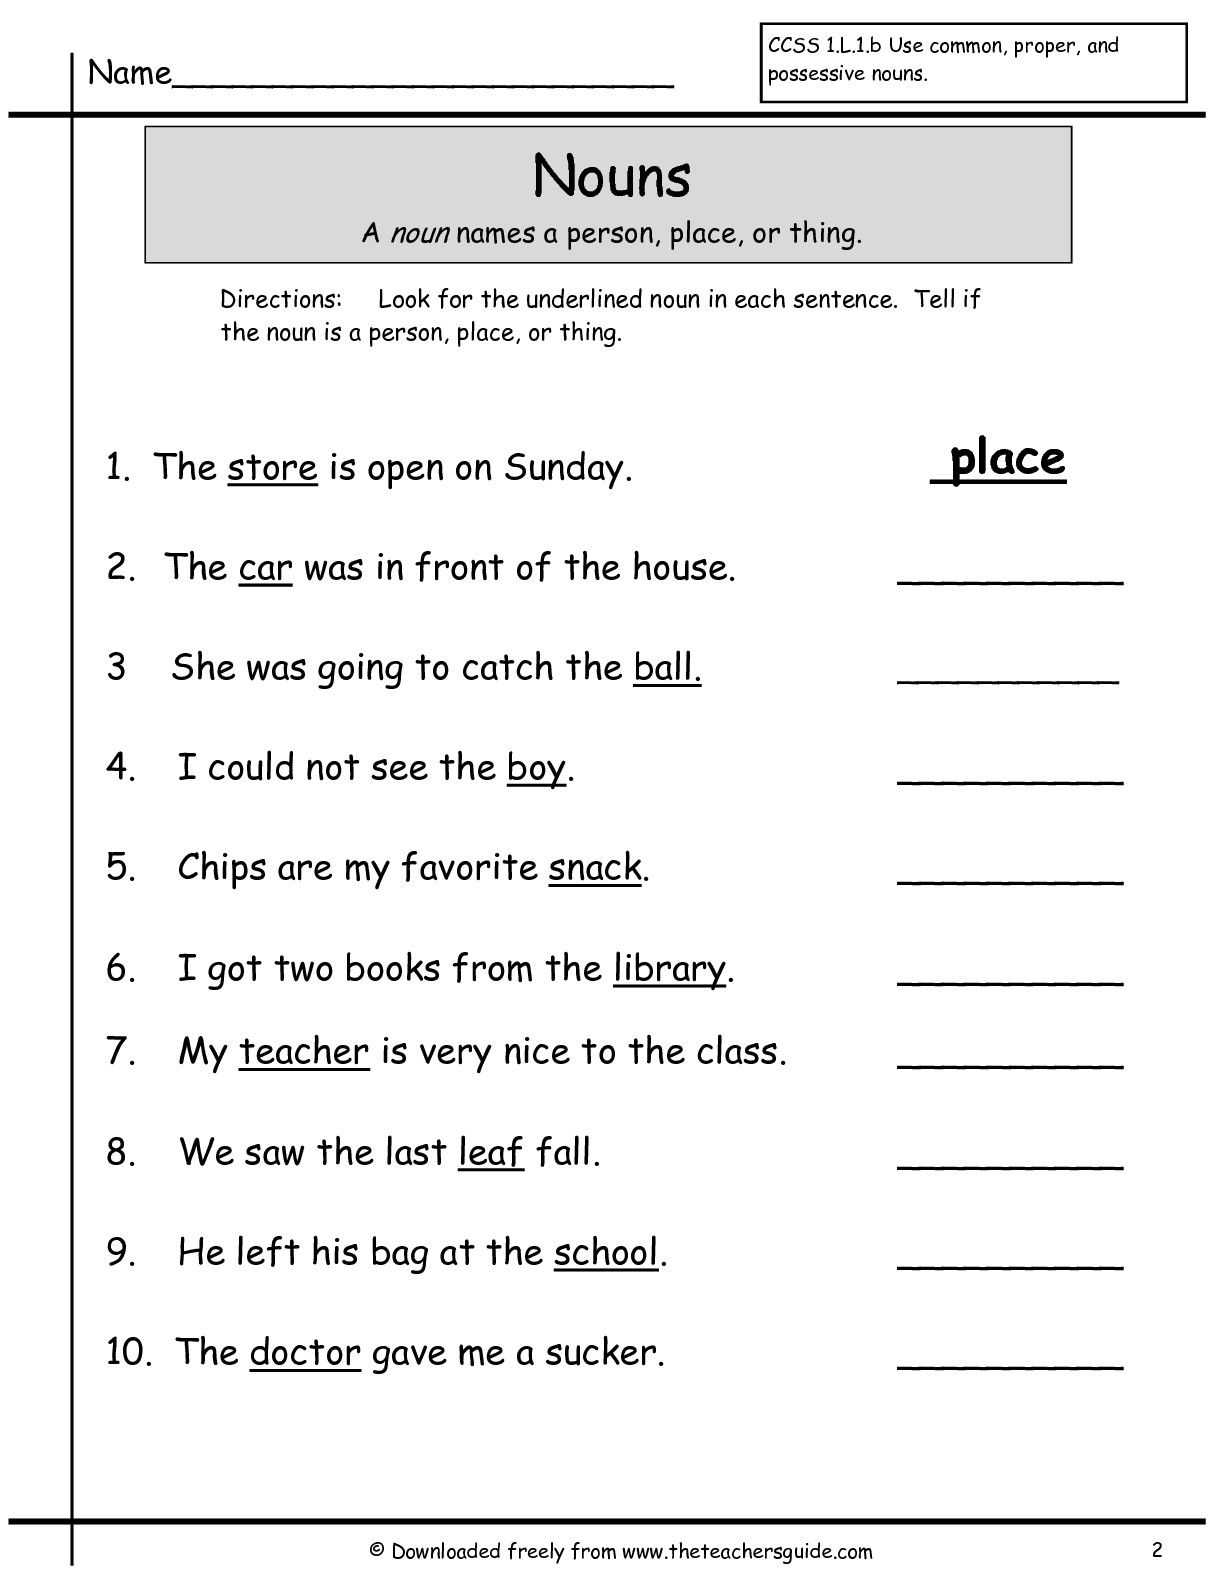 The Gender Of Nouns Spanish Worksheet Answers Along with Nouns Grade 1 Worksheets Google Search Kelina